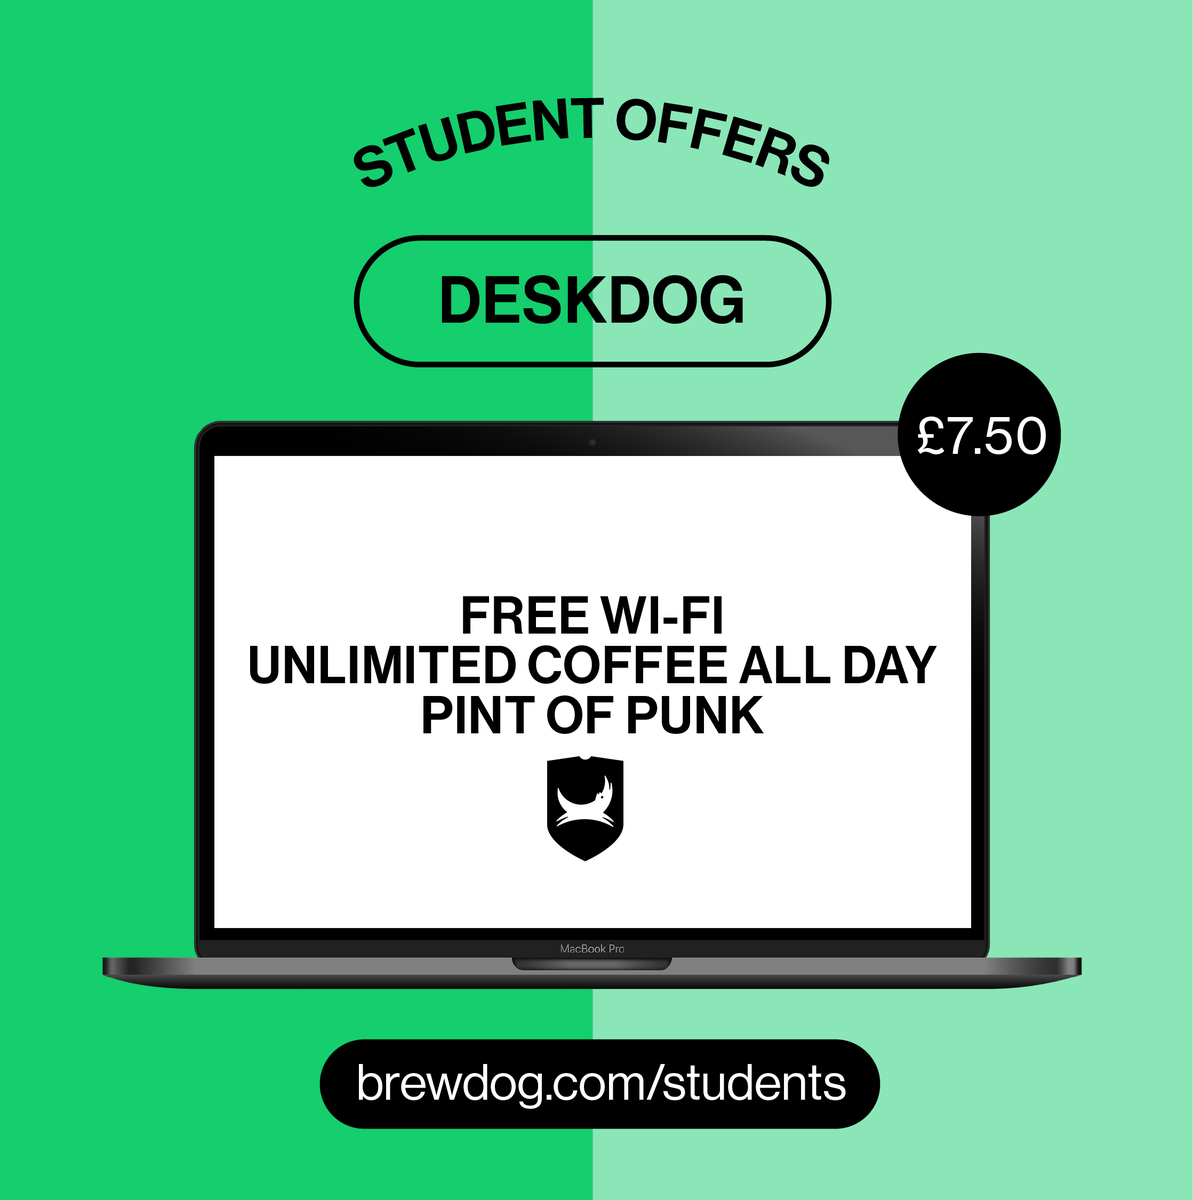 With the start of the academic year, don't forget about our Desk Dog co-working plan

The perfect place to work when you need a change of scenery (+tea, coffee and a pint). Check out our website for more info

#craftbeer #brighton #brewdog #beer #deskdog #university #workfromhome